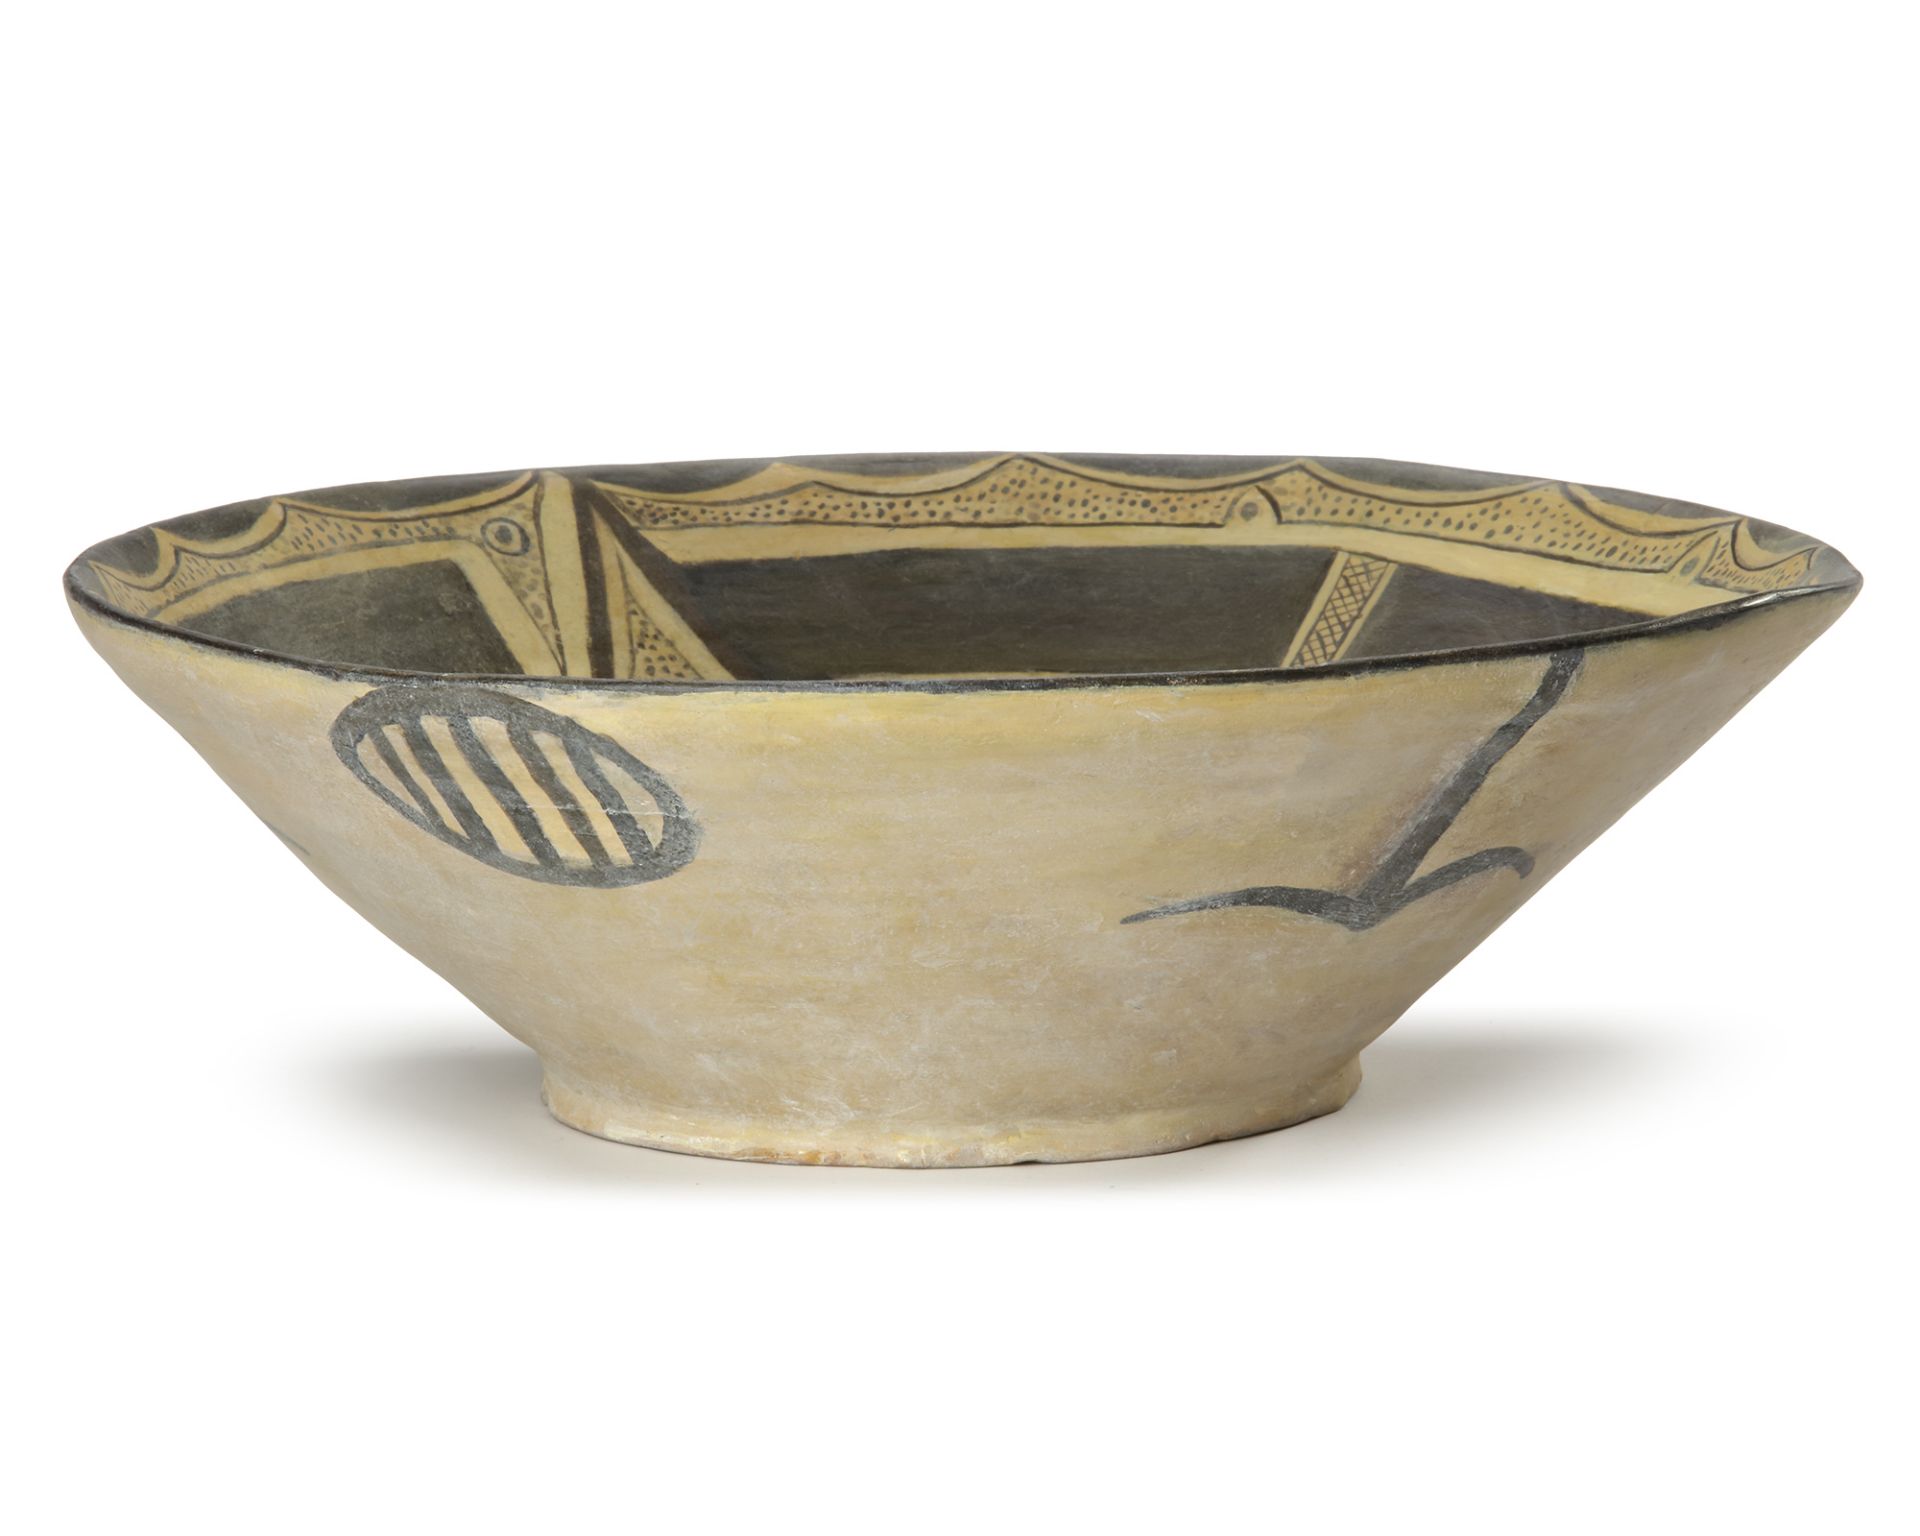 A NISHAPUR POTTERY BOWL, EASTERN PERSIA, 10TH CENTURY - Image 8 of 10